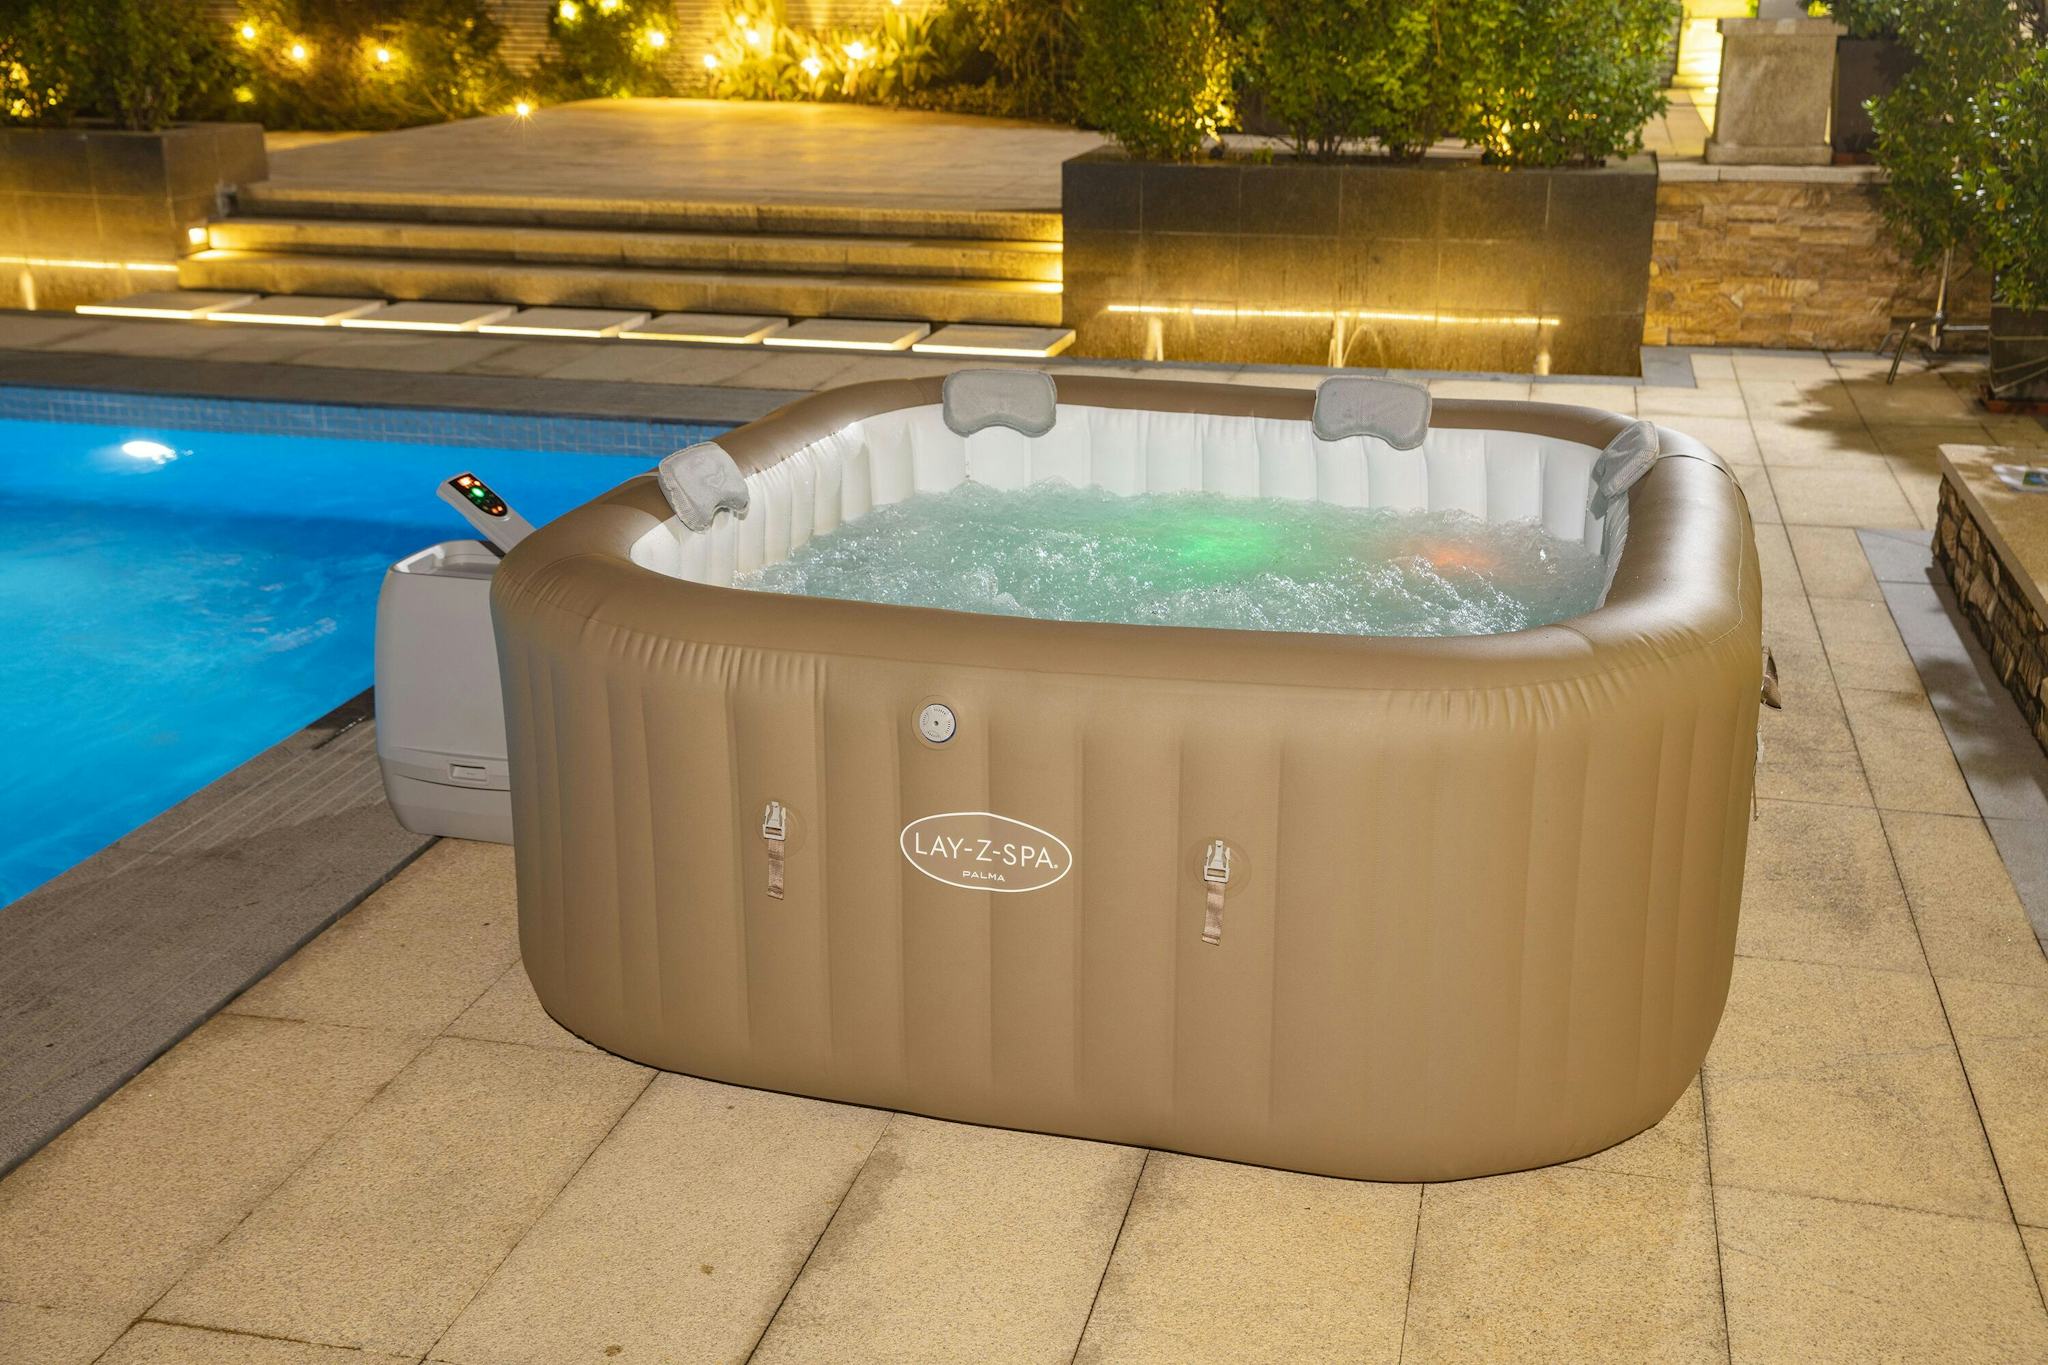 Spas Gonflables Spa gonflable carré Lay-Z-Spa® Palma Hydrojet Pro™ 5 - 7 places Bestway 21